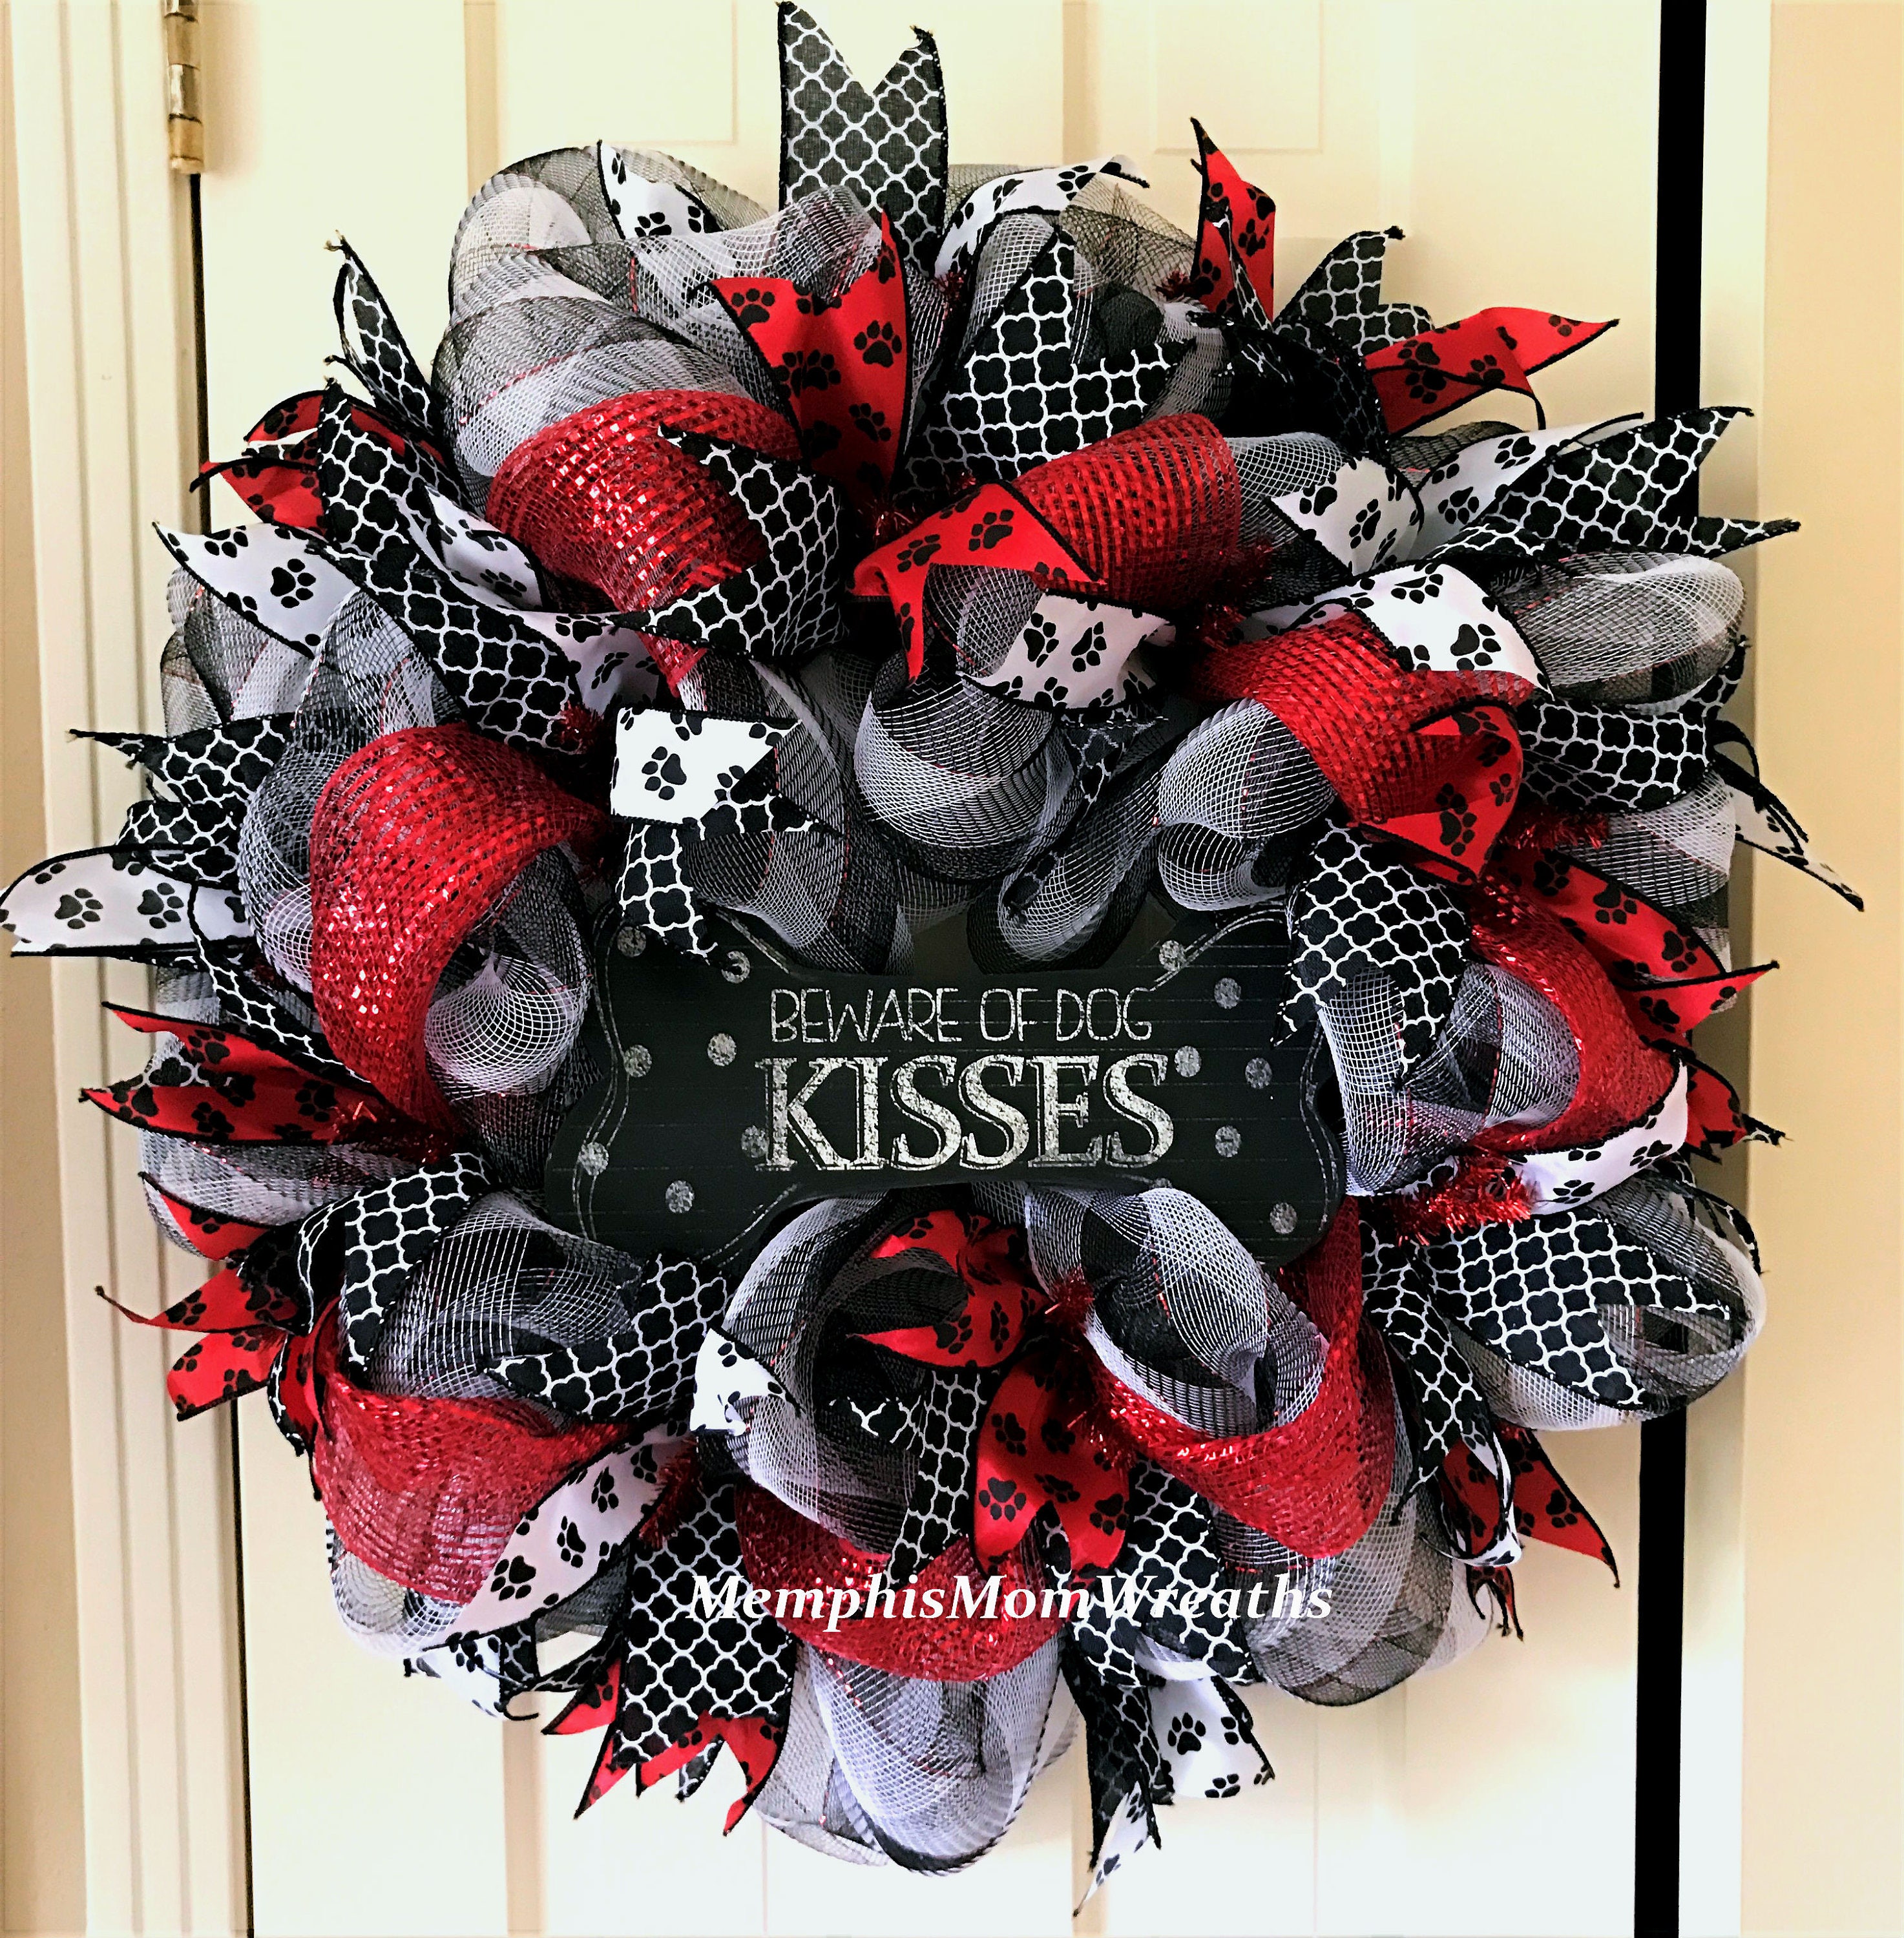 This 24" diameter wreath features 21" black and white plaid with ...